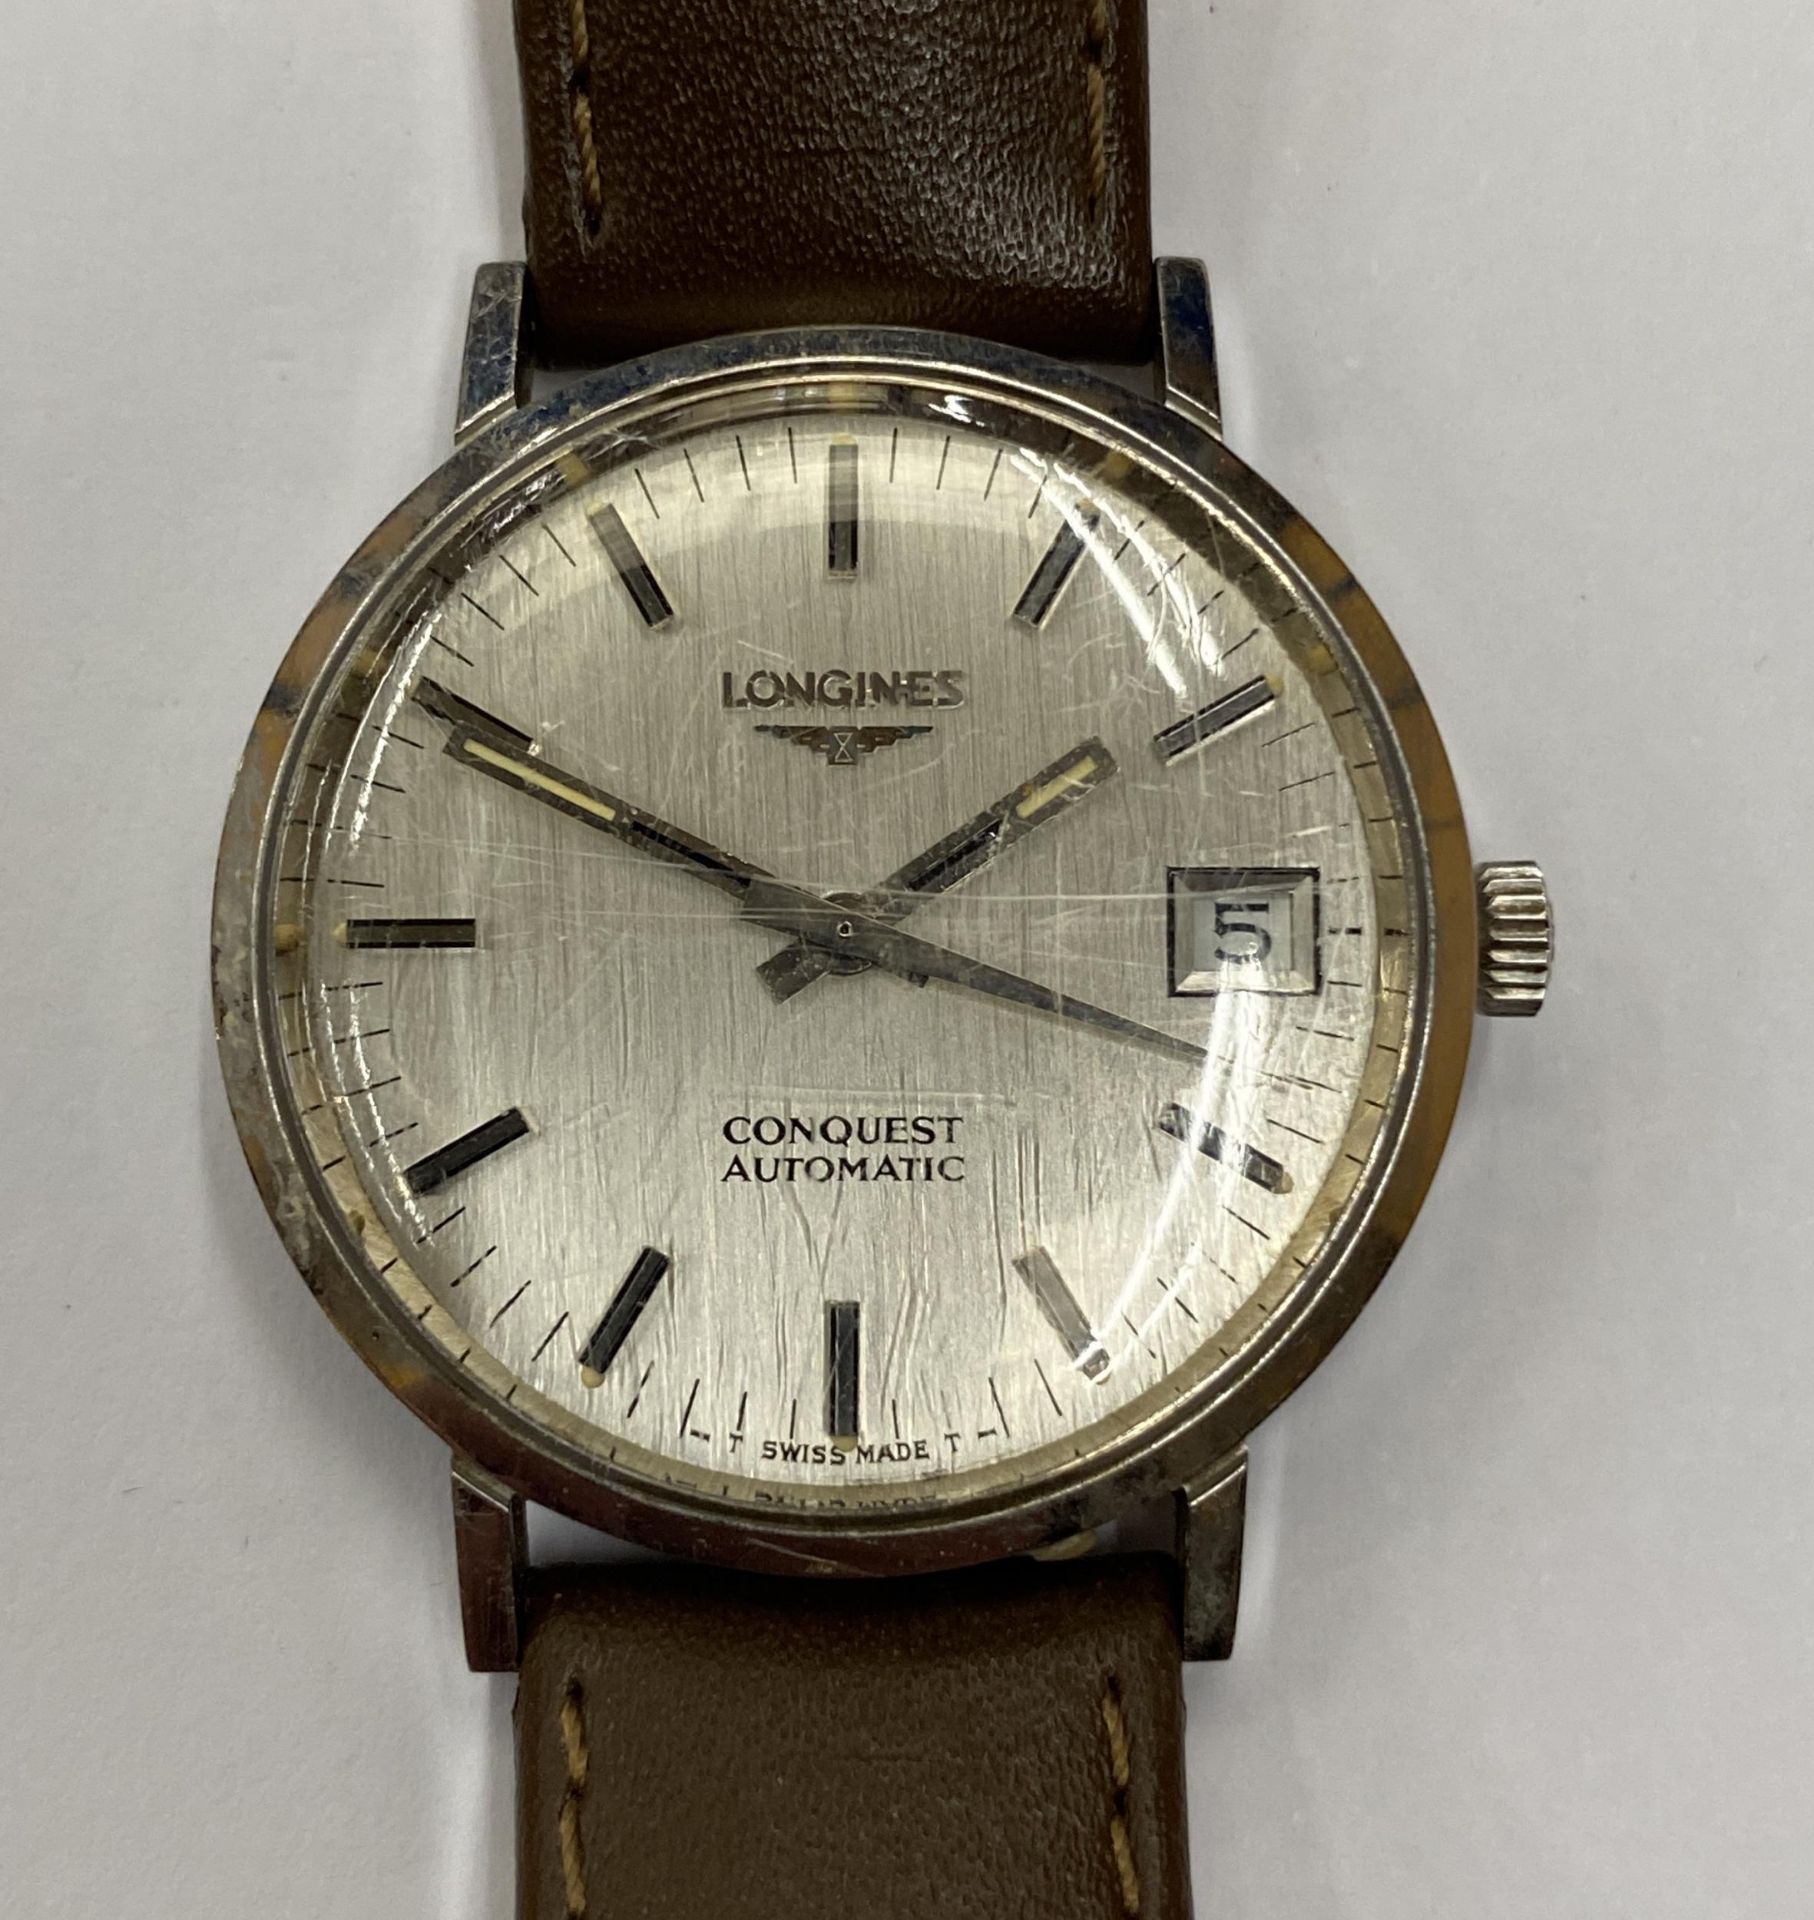 A VINTAGE LONGINES CONQUEST AUTOMATIC WRIST WATCH WITH LEATHER STRAP SEEN WORKING BUT NO WARRANTY